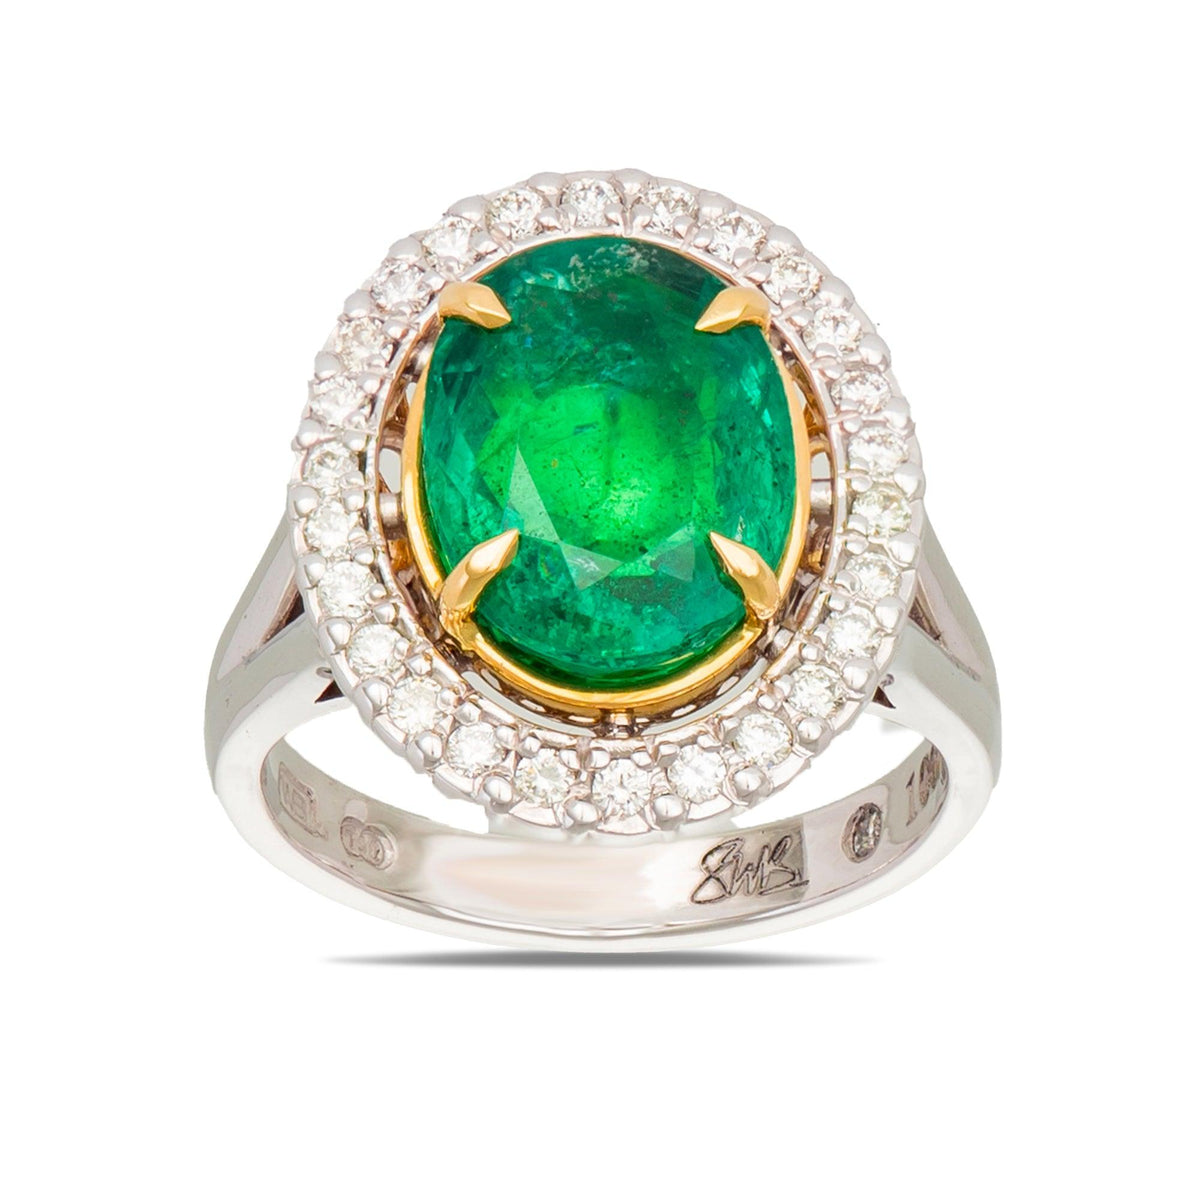 Stuart Bishop Collection Emerald and Diamond Ring in 18ct Yellow and White Gold TDW 0.520 - Wallace Bishop